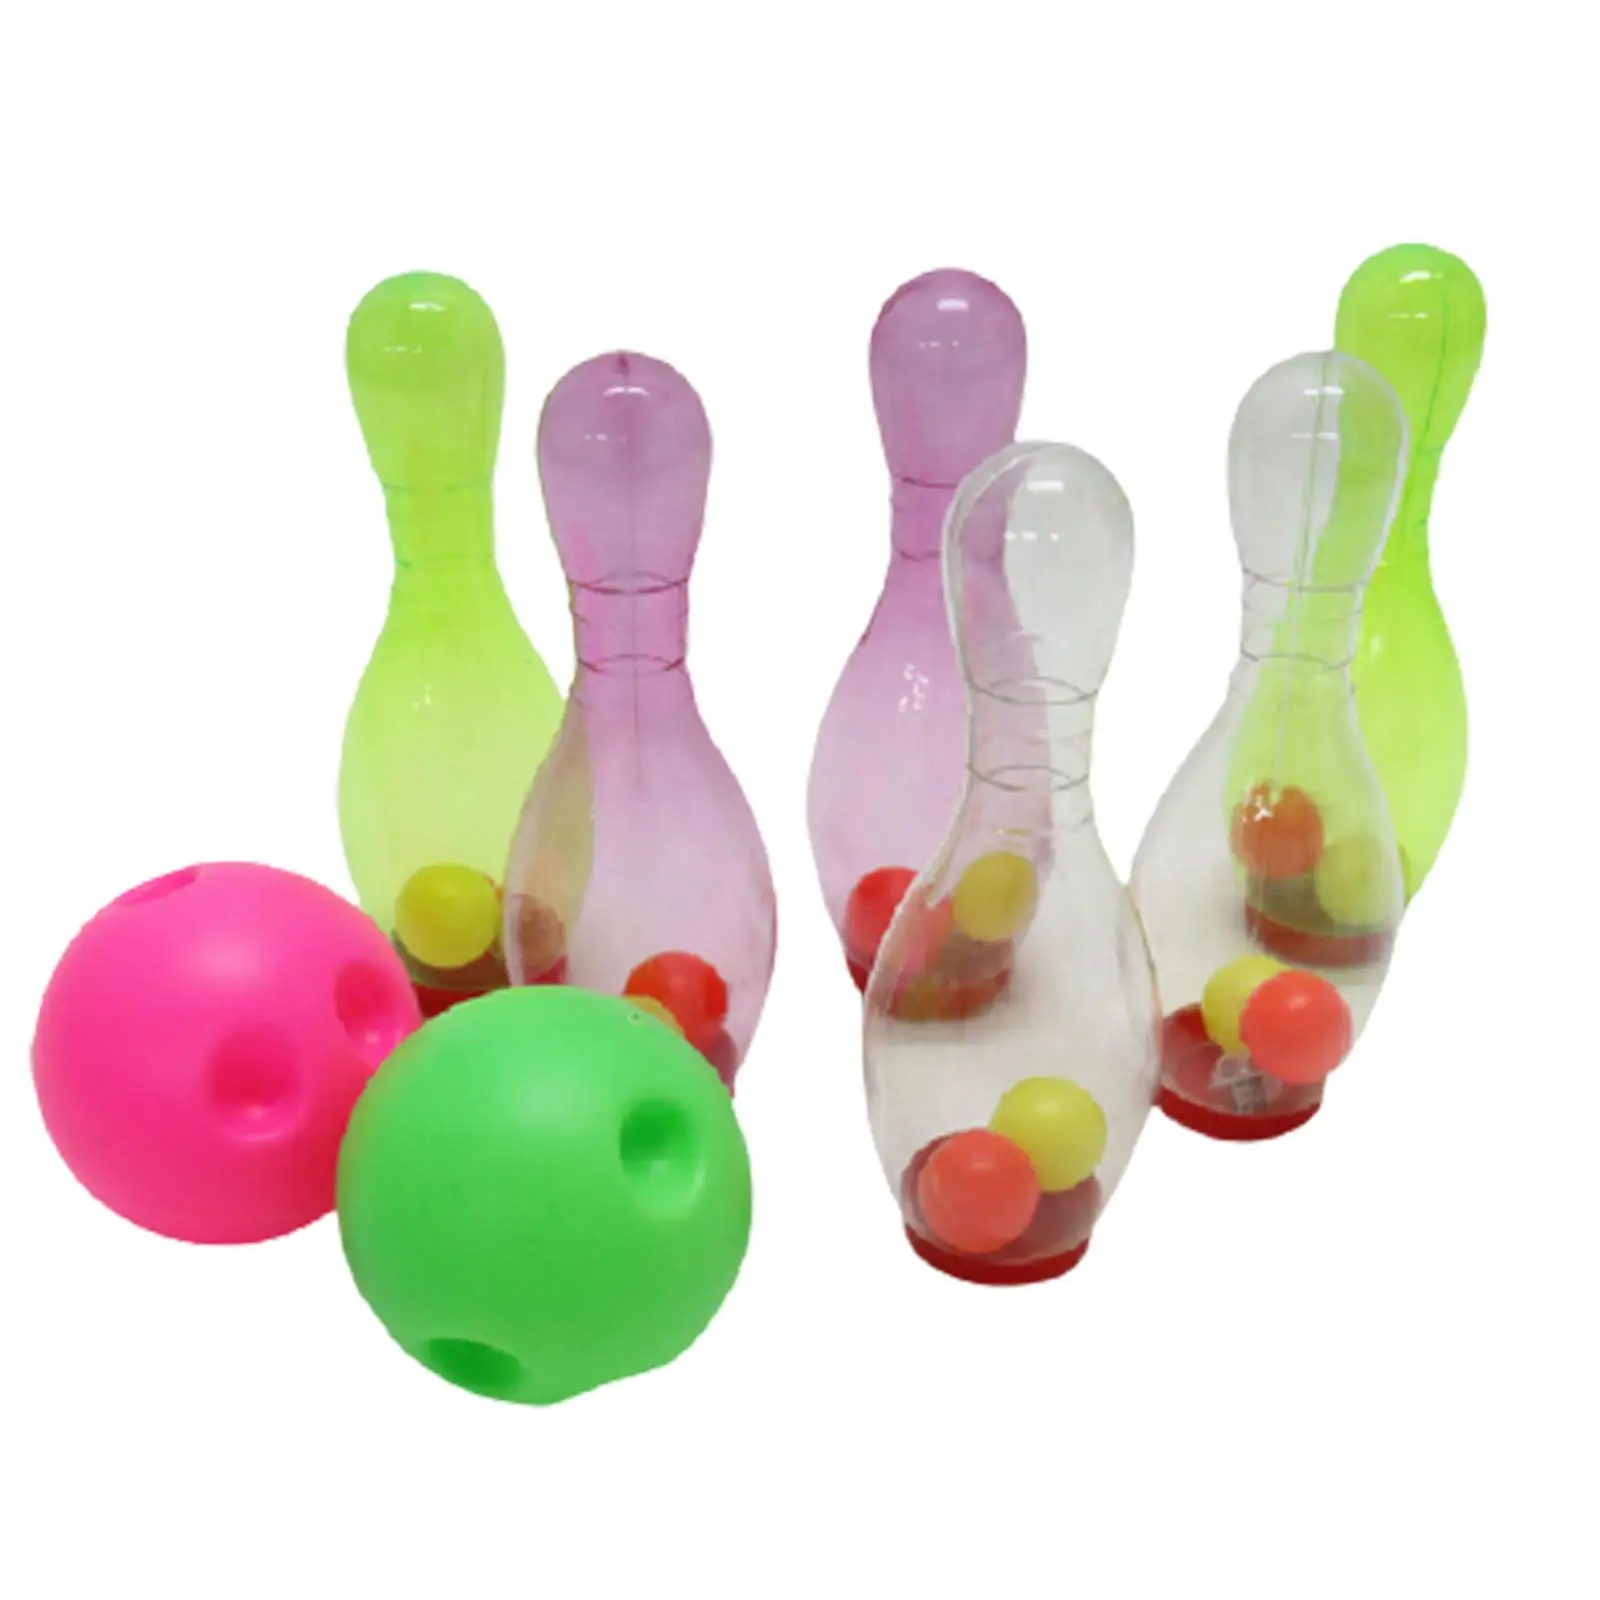 Kids Bowling Game Light up Hand Eye Coordination sports Games for Kids